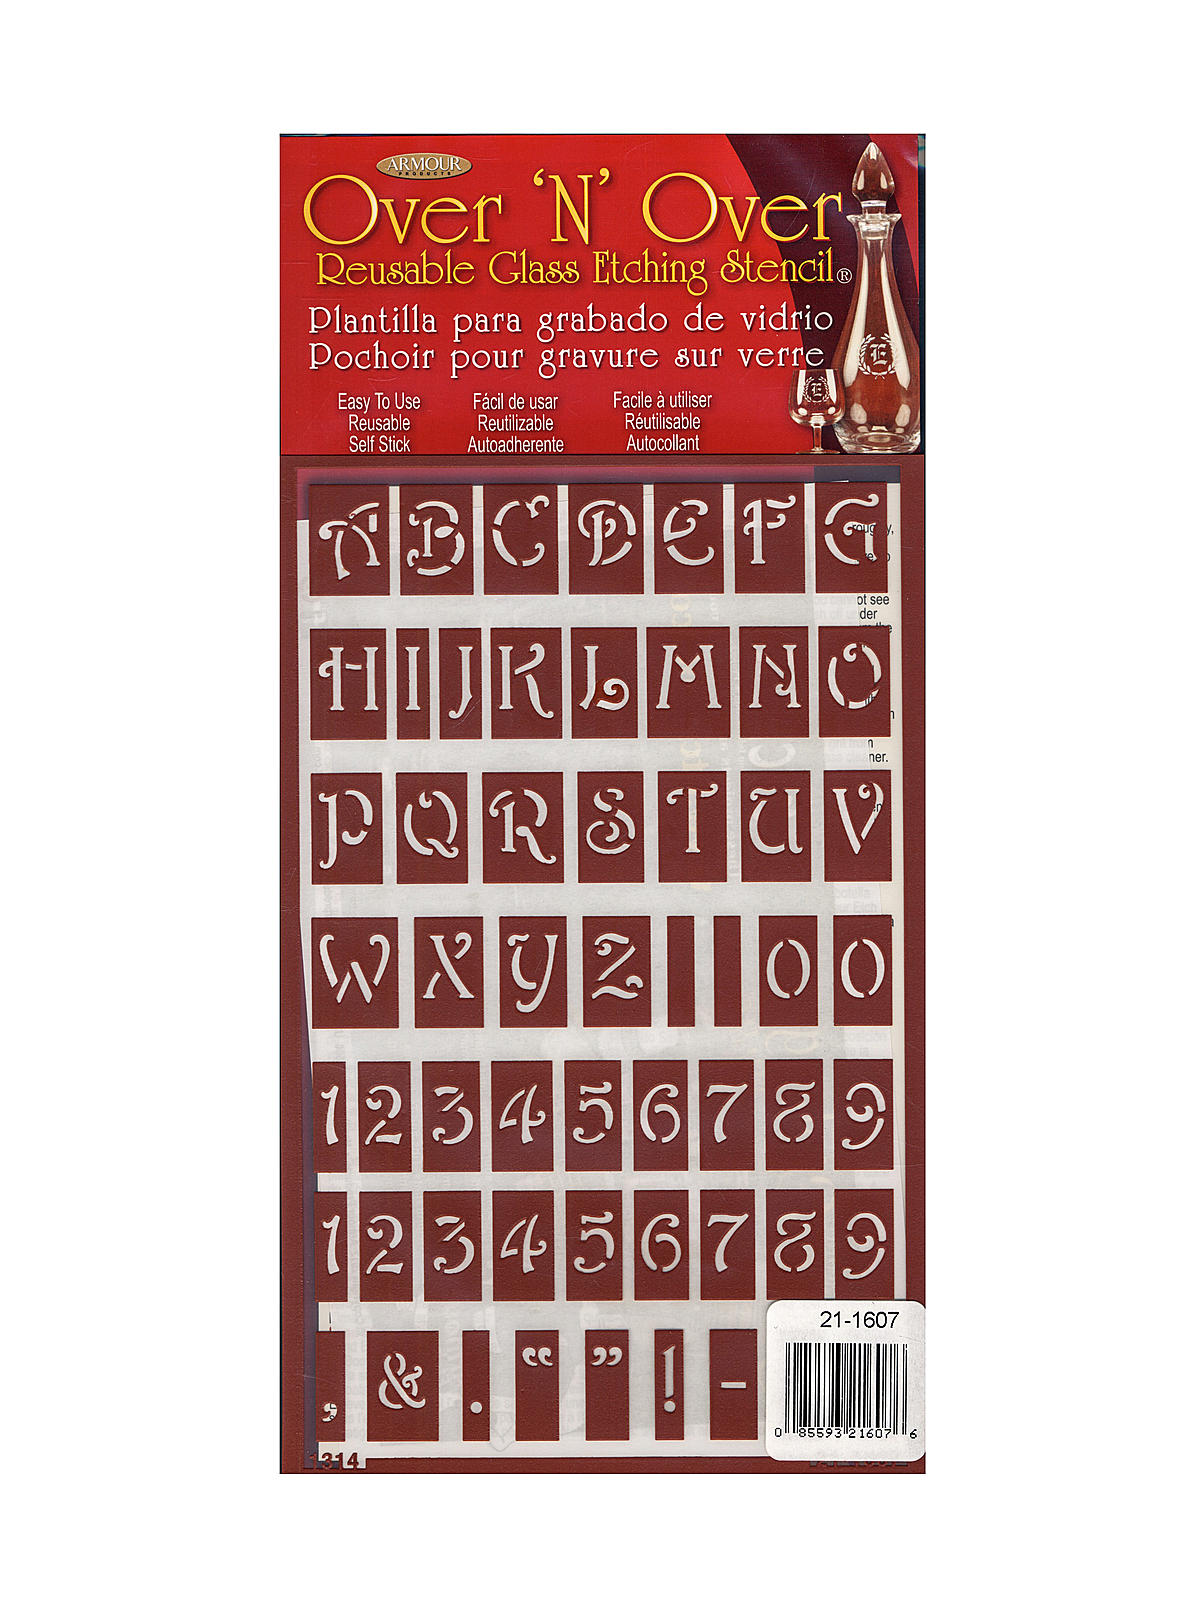 Over'n'Over Re-usable Glass Etching Stencils Alpha Upper Case Each